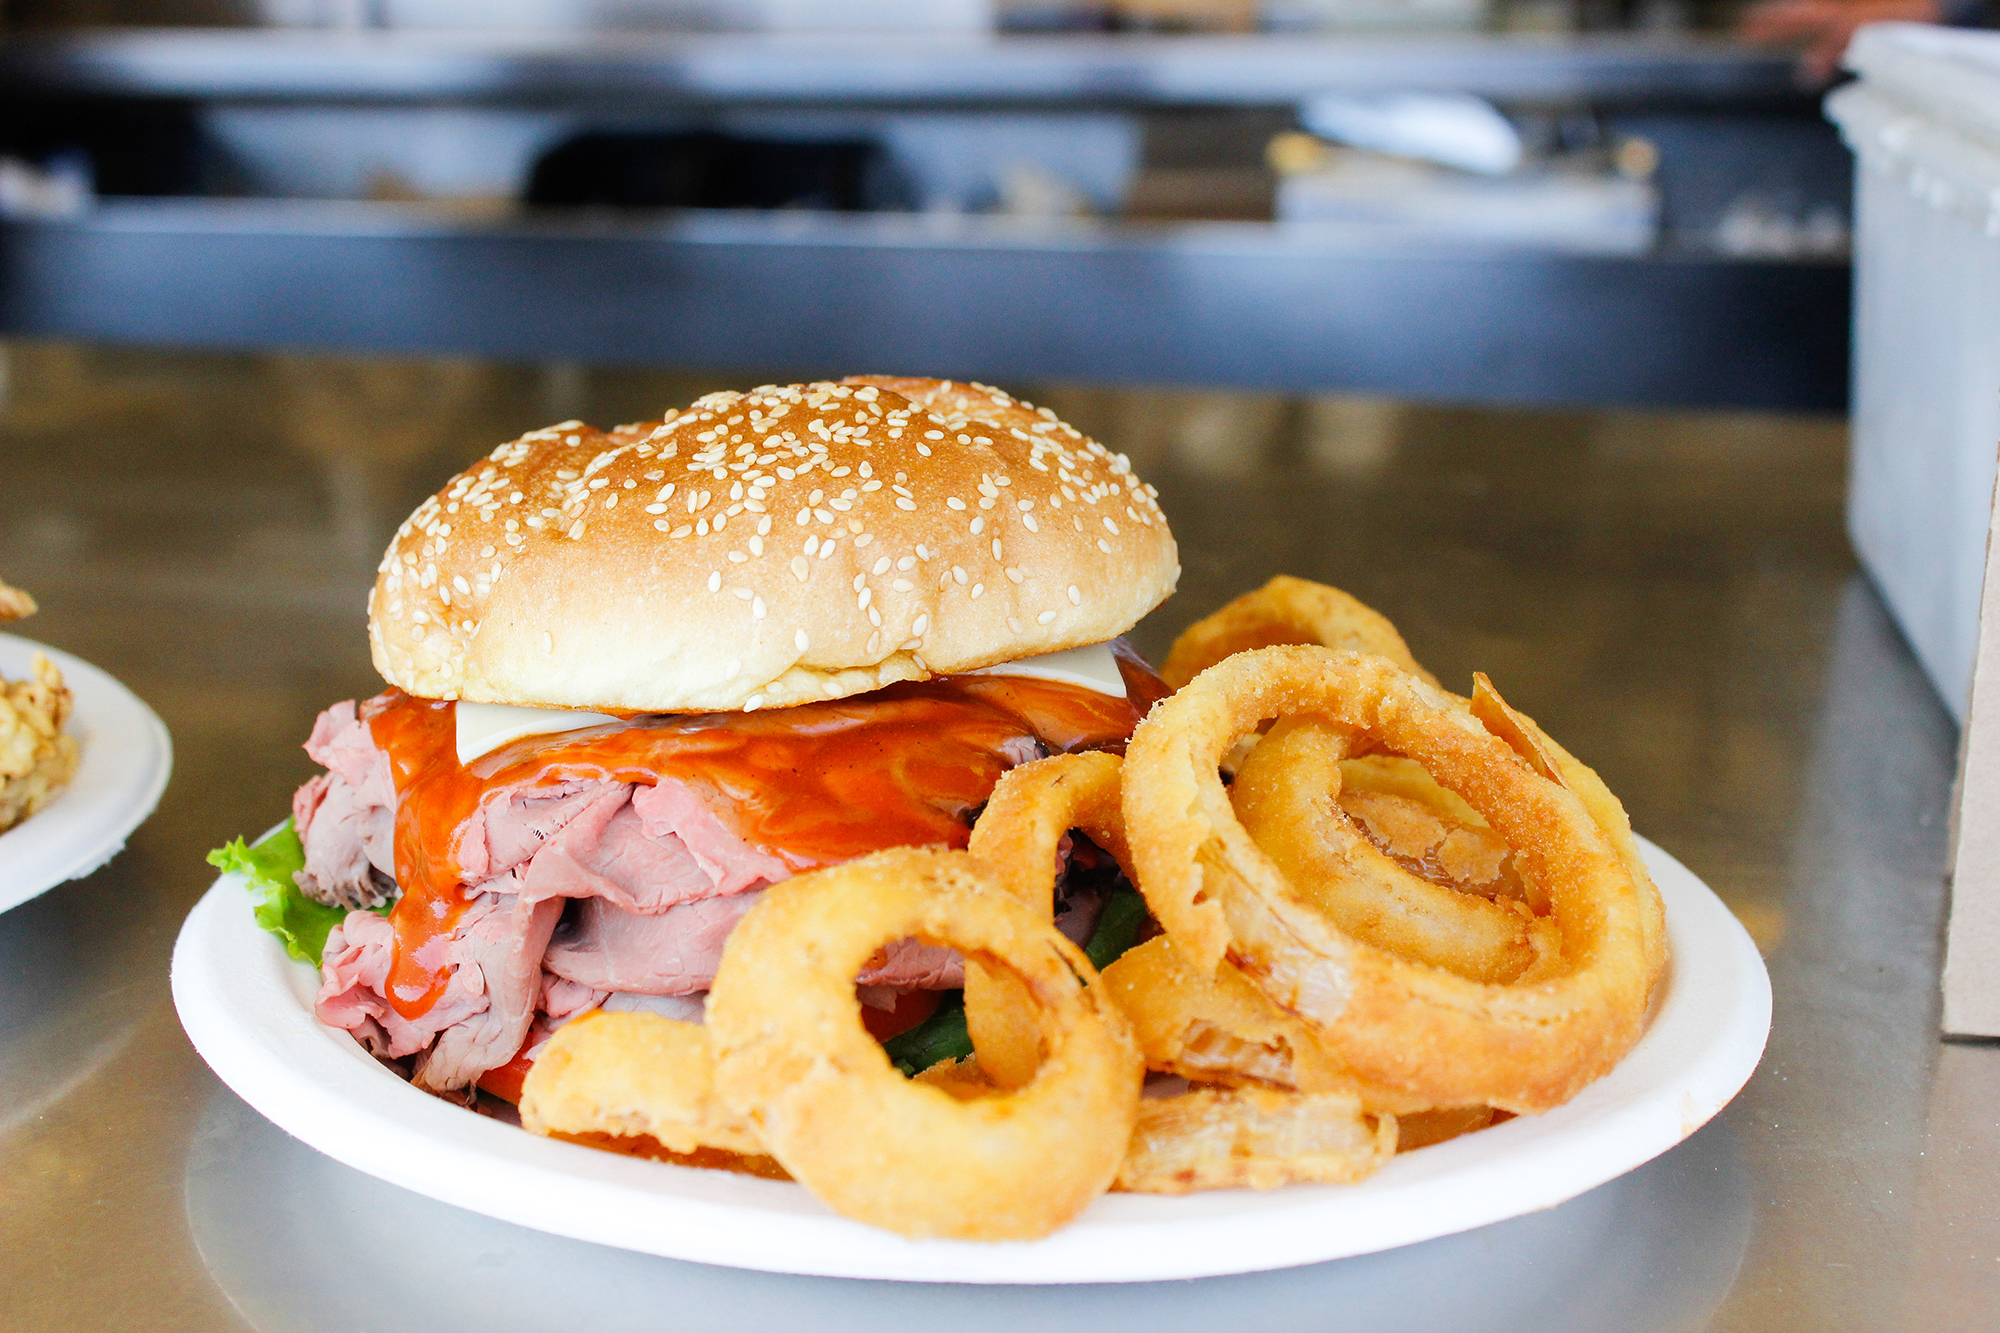 A roast beef sandwich with cheese, mayo, and barbecue sauce sits on a paper plate, accompanied by thick onion rings.